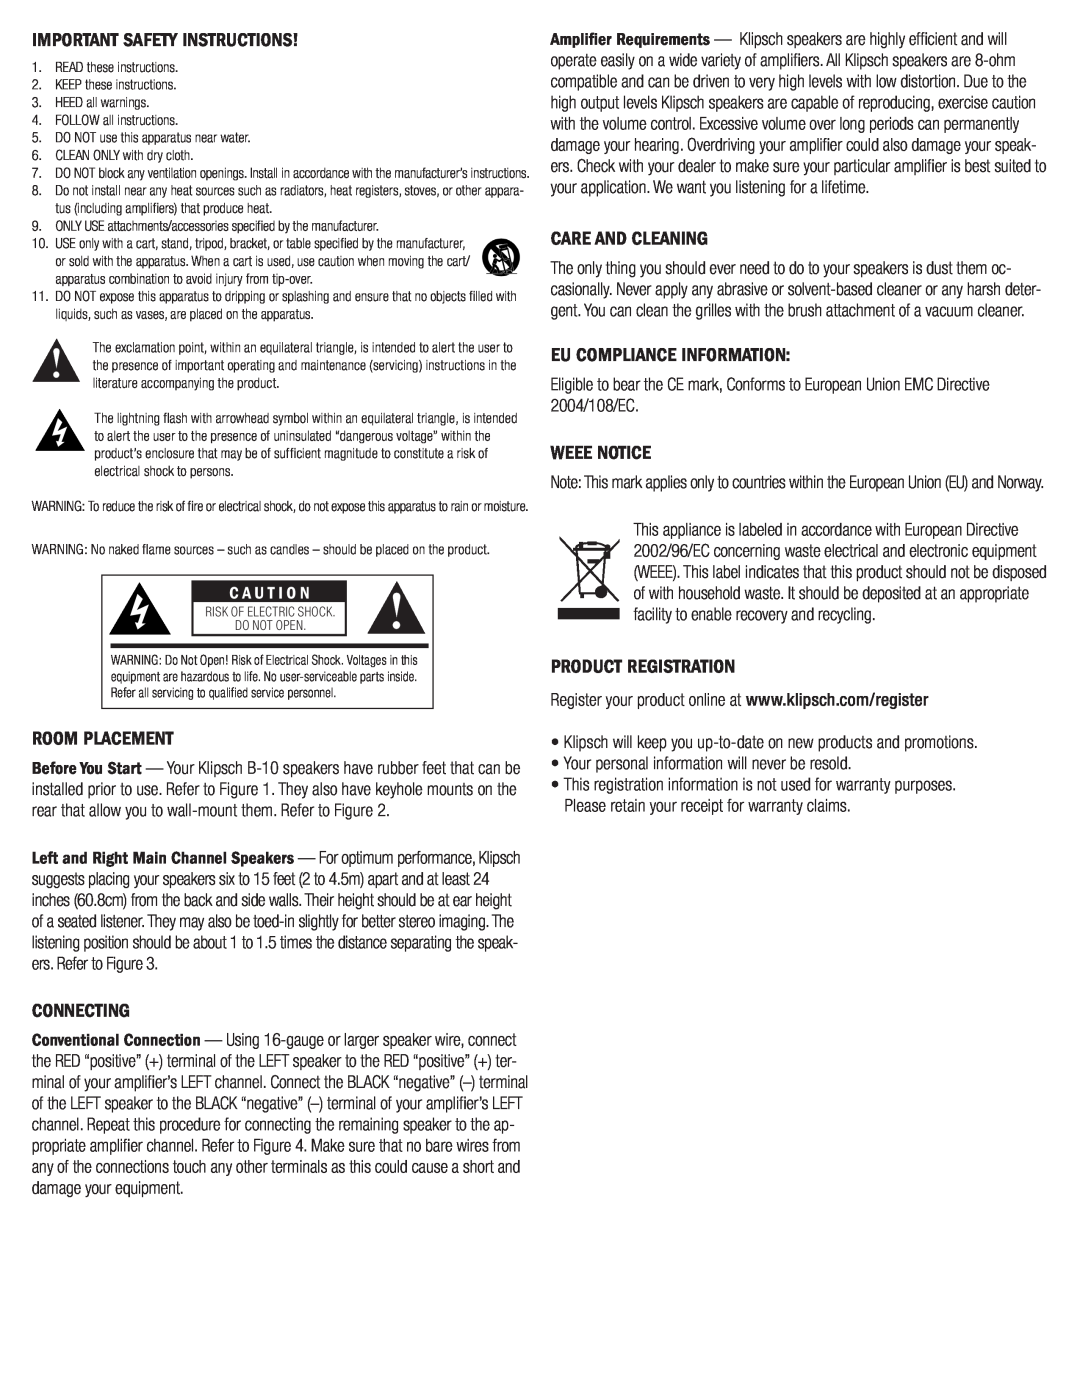 Klipsch B-10 Important Safety Instructions, Room Placement, Connecting, Care And Cleaning, Eu Compliance Information 